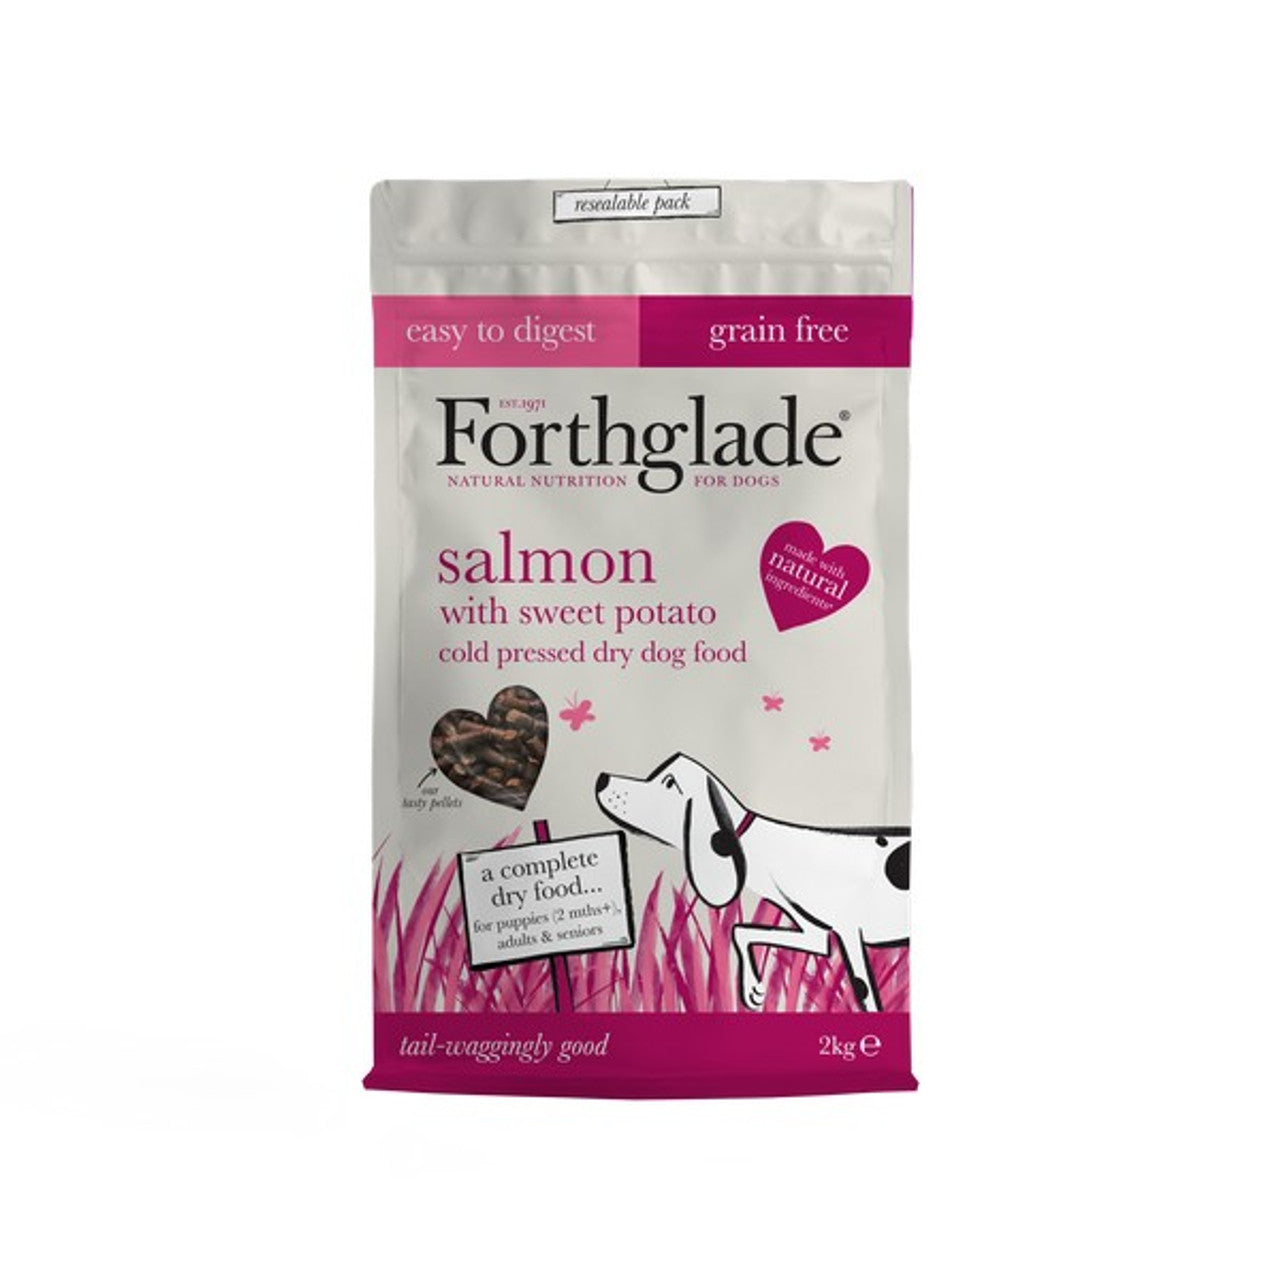 Forthglade Salmon Grain Free Cold Pressed Natural Dry Dog Food